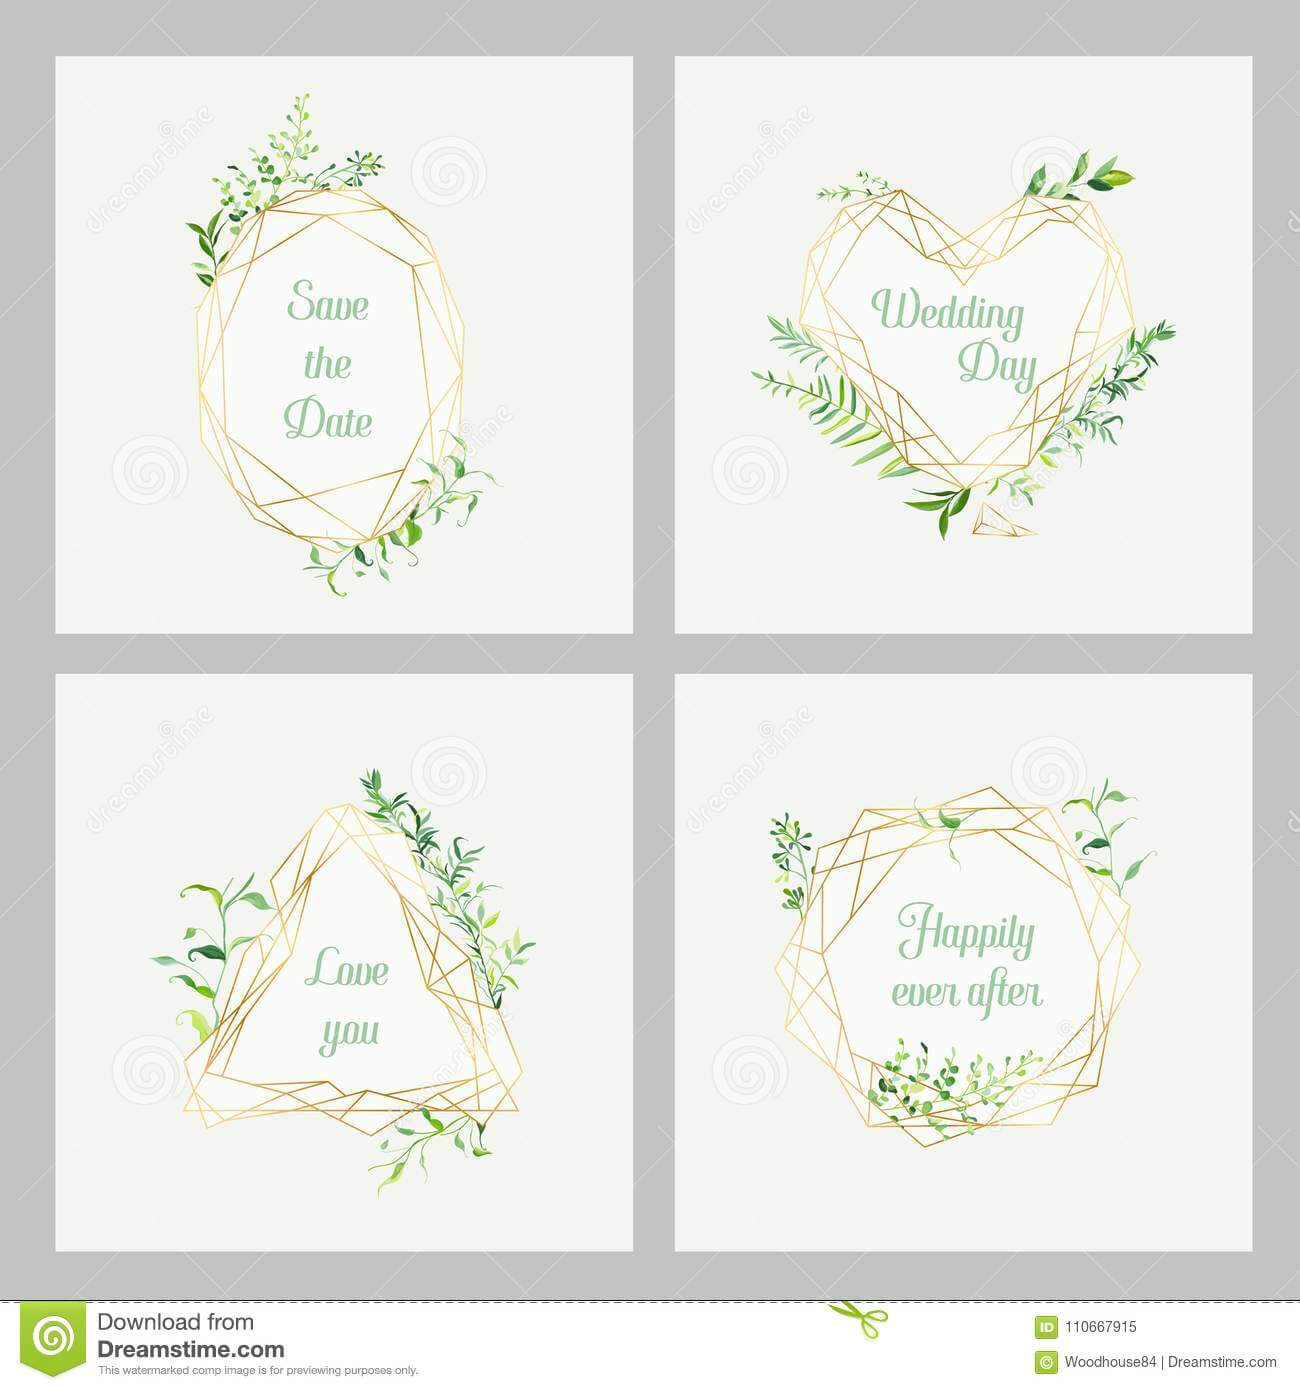 Wedding Invitation Floral Templates Set. Save The Date Pertaining To Celebrate It Templates Place Cards